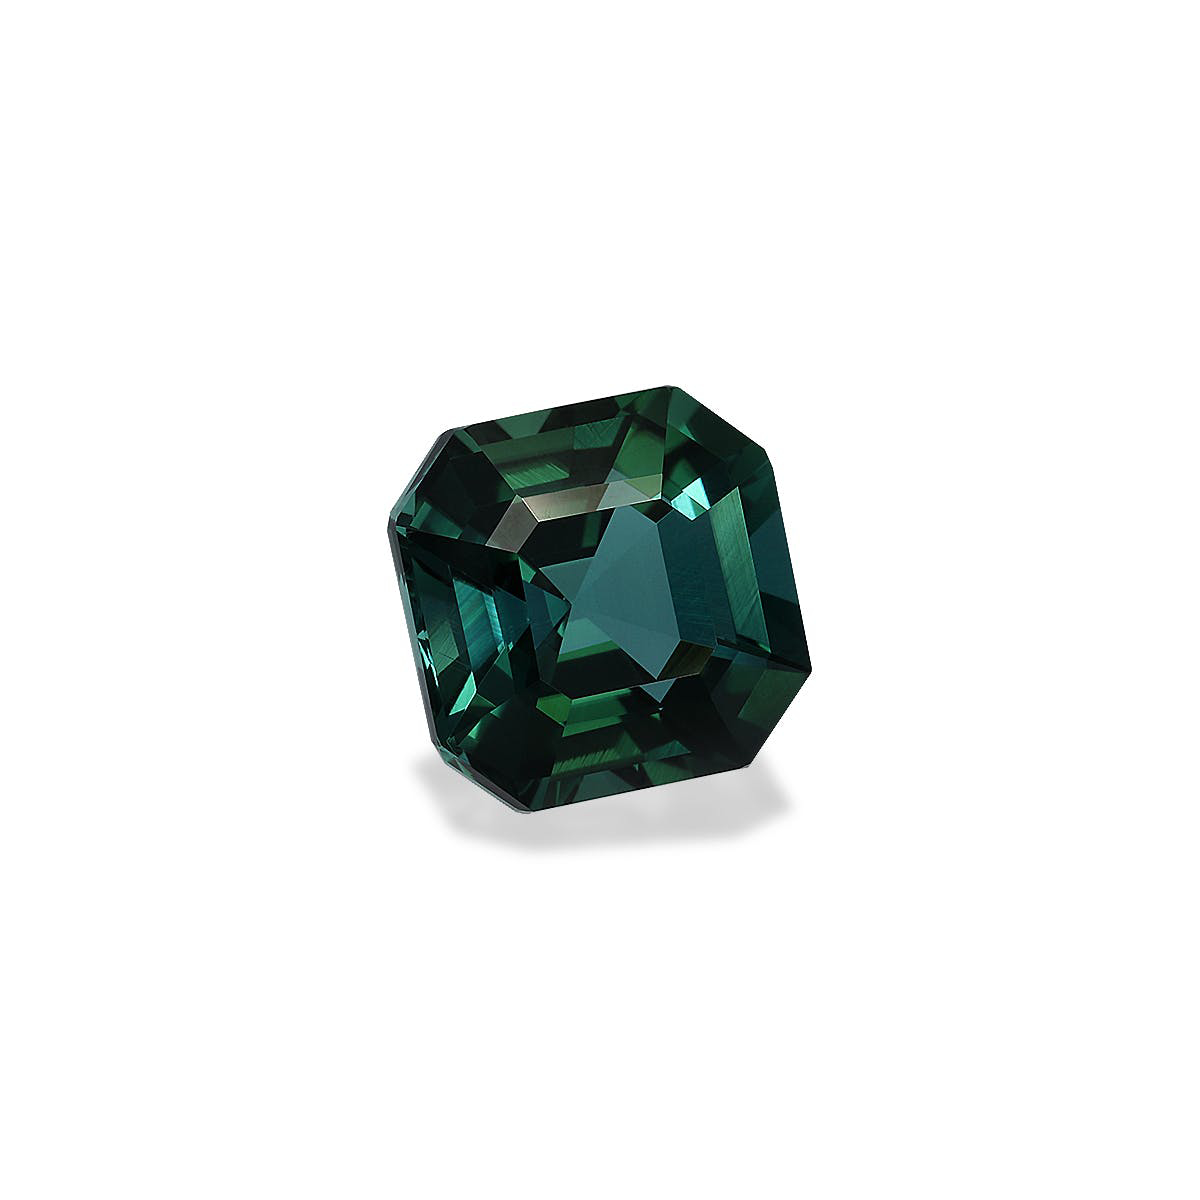 Picture of Ocean Blue Tourmaline 7.99ct - 11mm (TB0214)